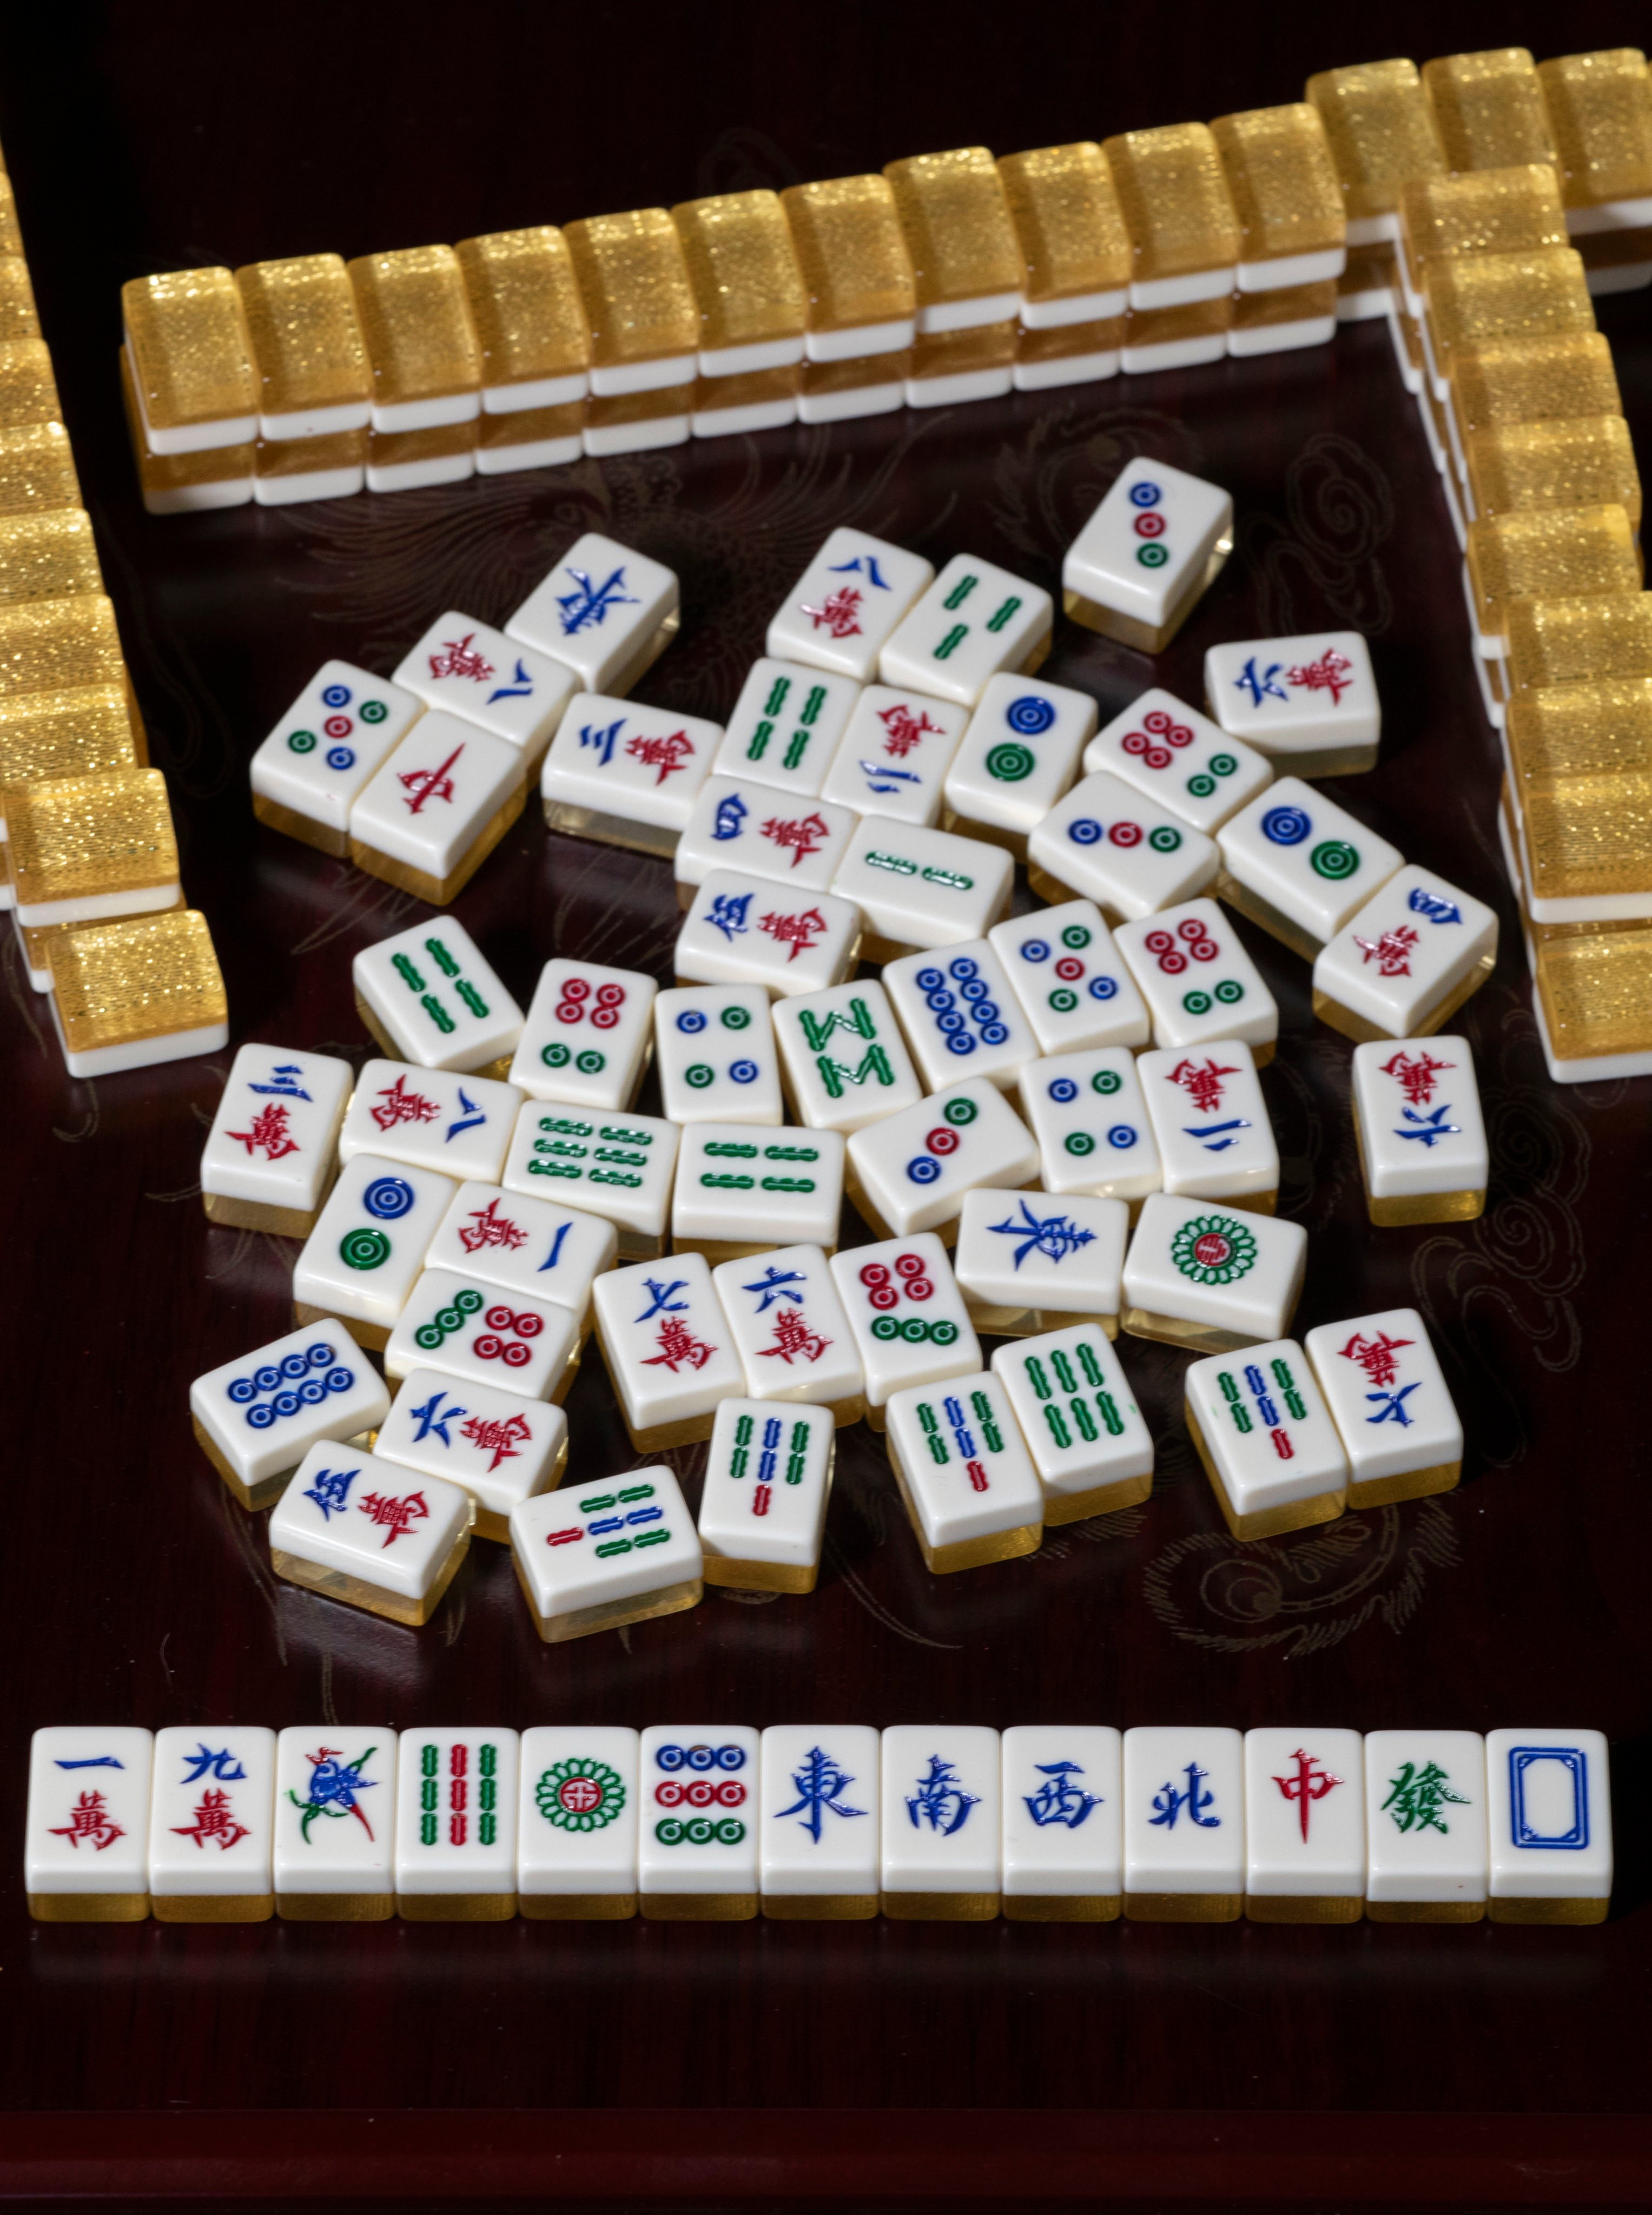 What are the simplest ways to win mahjong? We take a look at how to figure out the strategies of the other players and how to psyche your opponents out. Photo: Antony Dickson